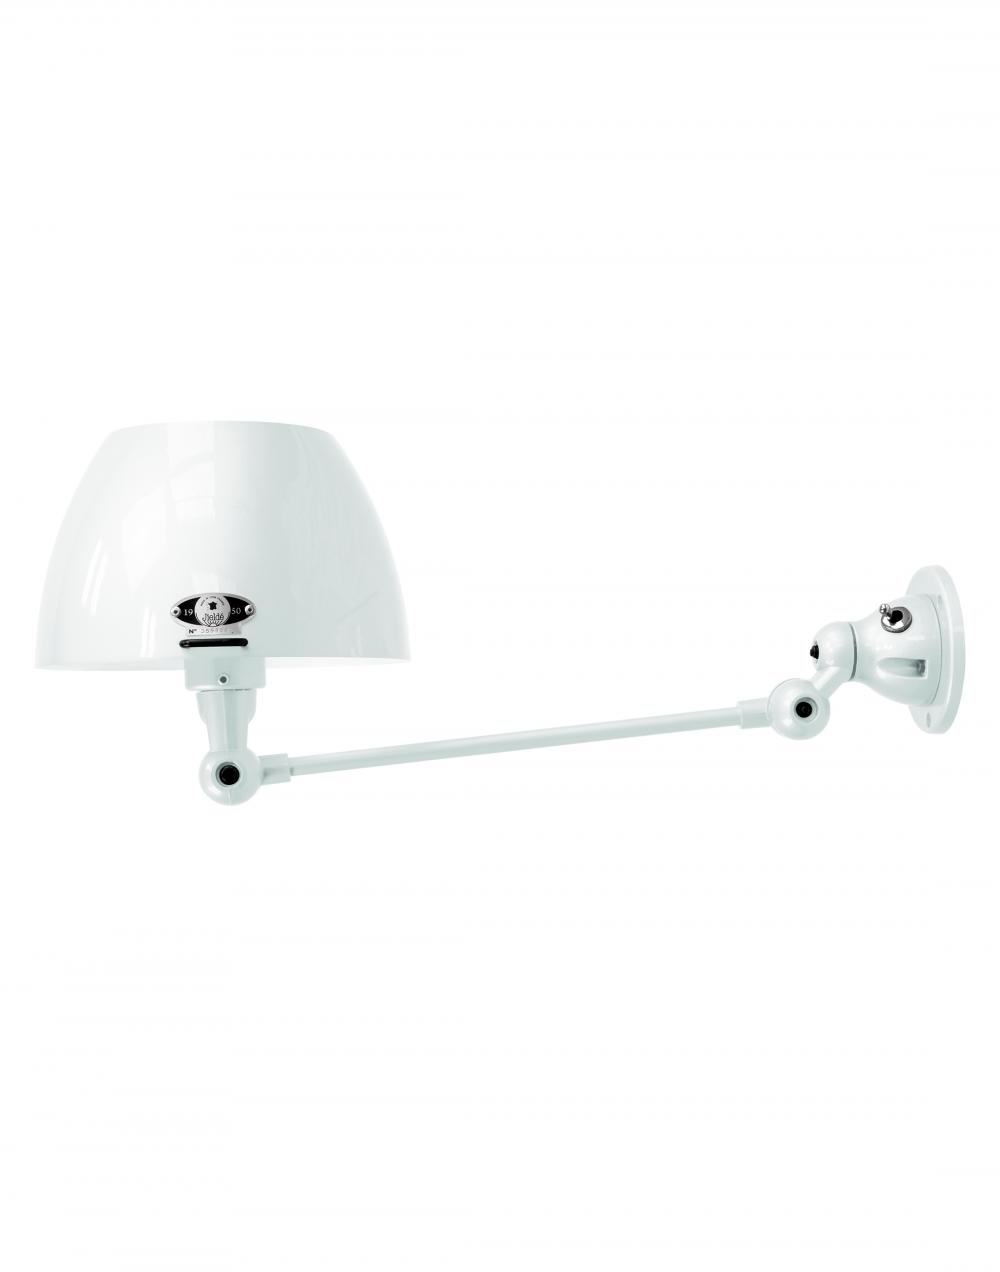 Jielde Aicler One Arm Adjustable Wall Light Curved Shade White Matt Hardwired No Switch